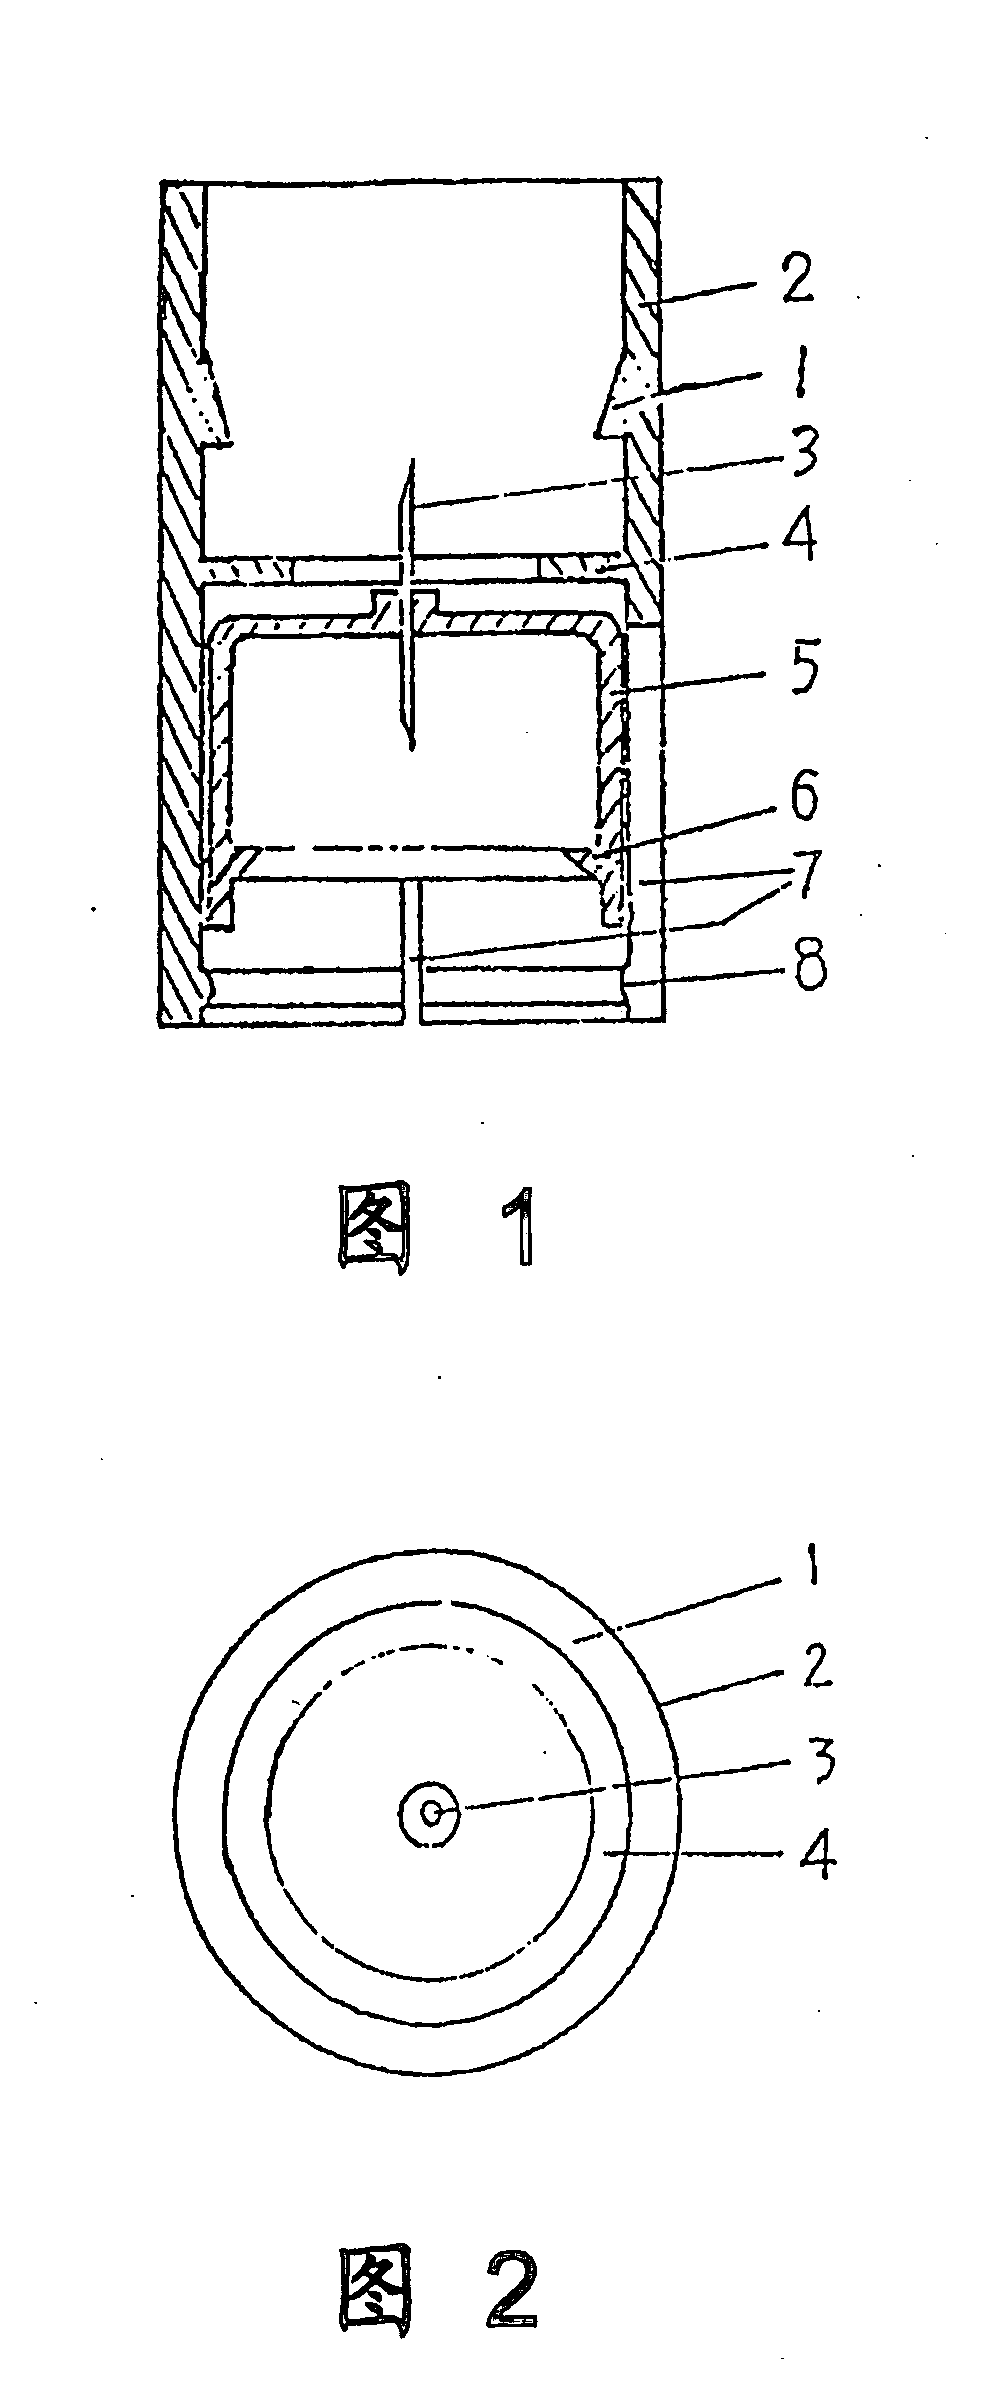 Drug Mixing and Delivery Device